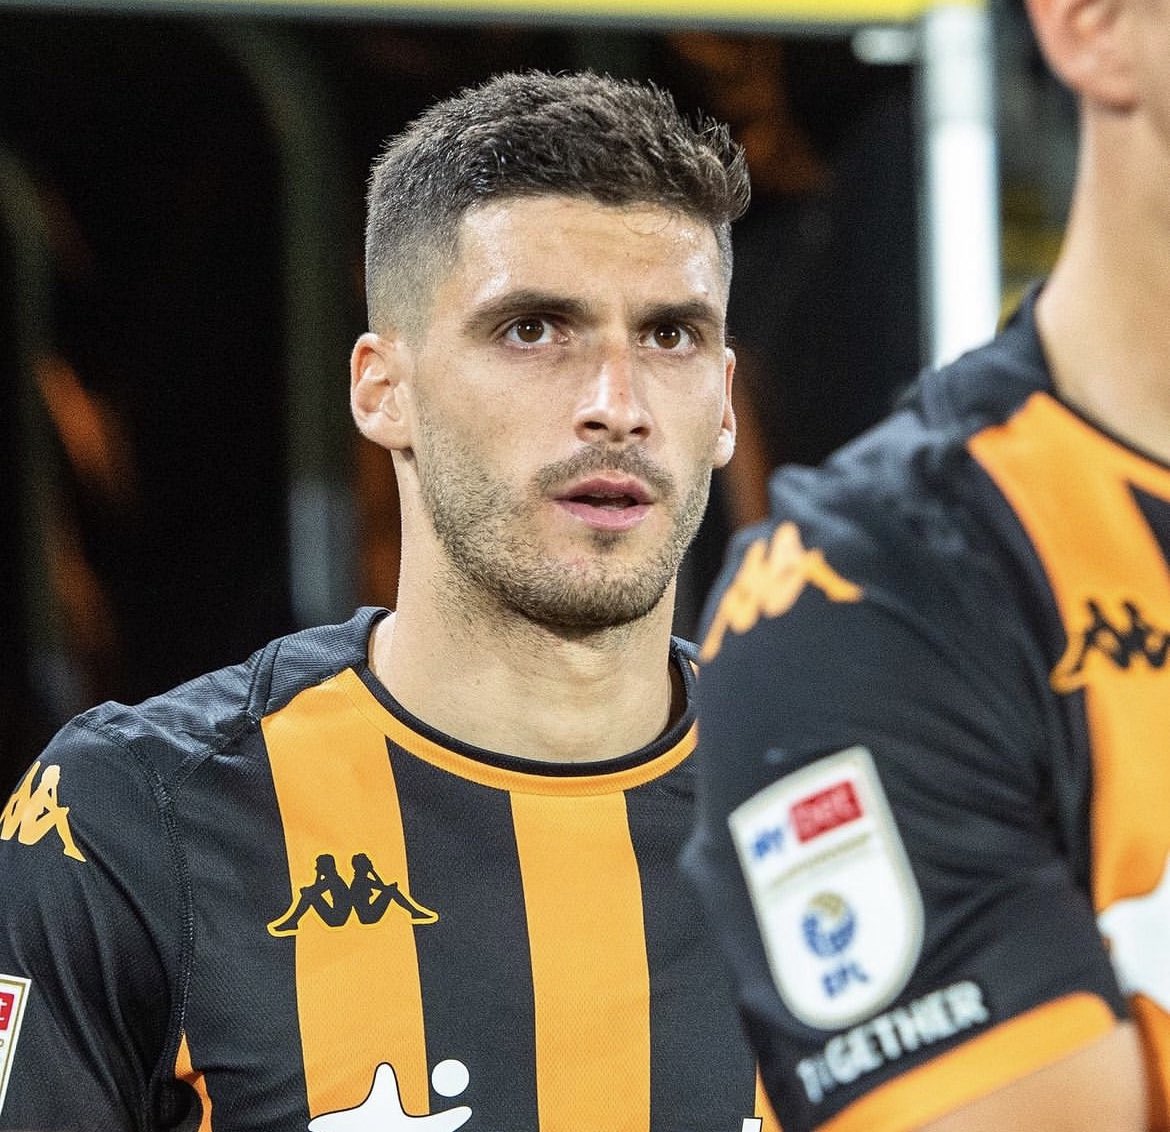 Ruben Vinagre is likely to have his loan deal terminated this month after an injury hit start to the season.

(@bazdjcooper via #1904club Podcast) #hcafc